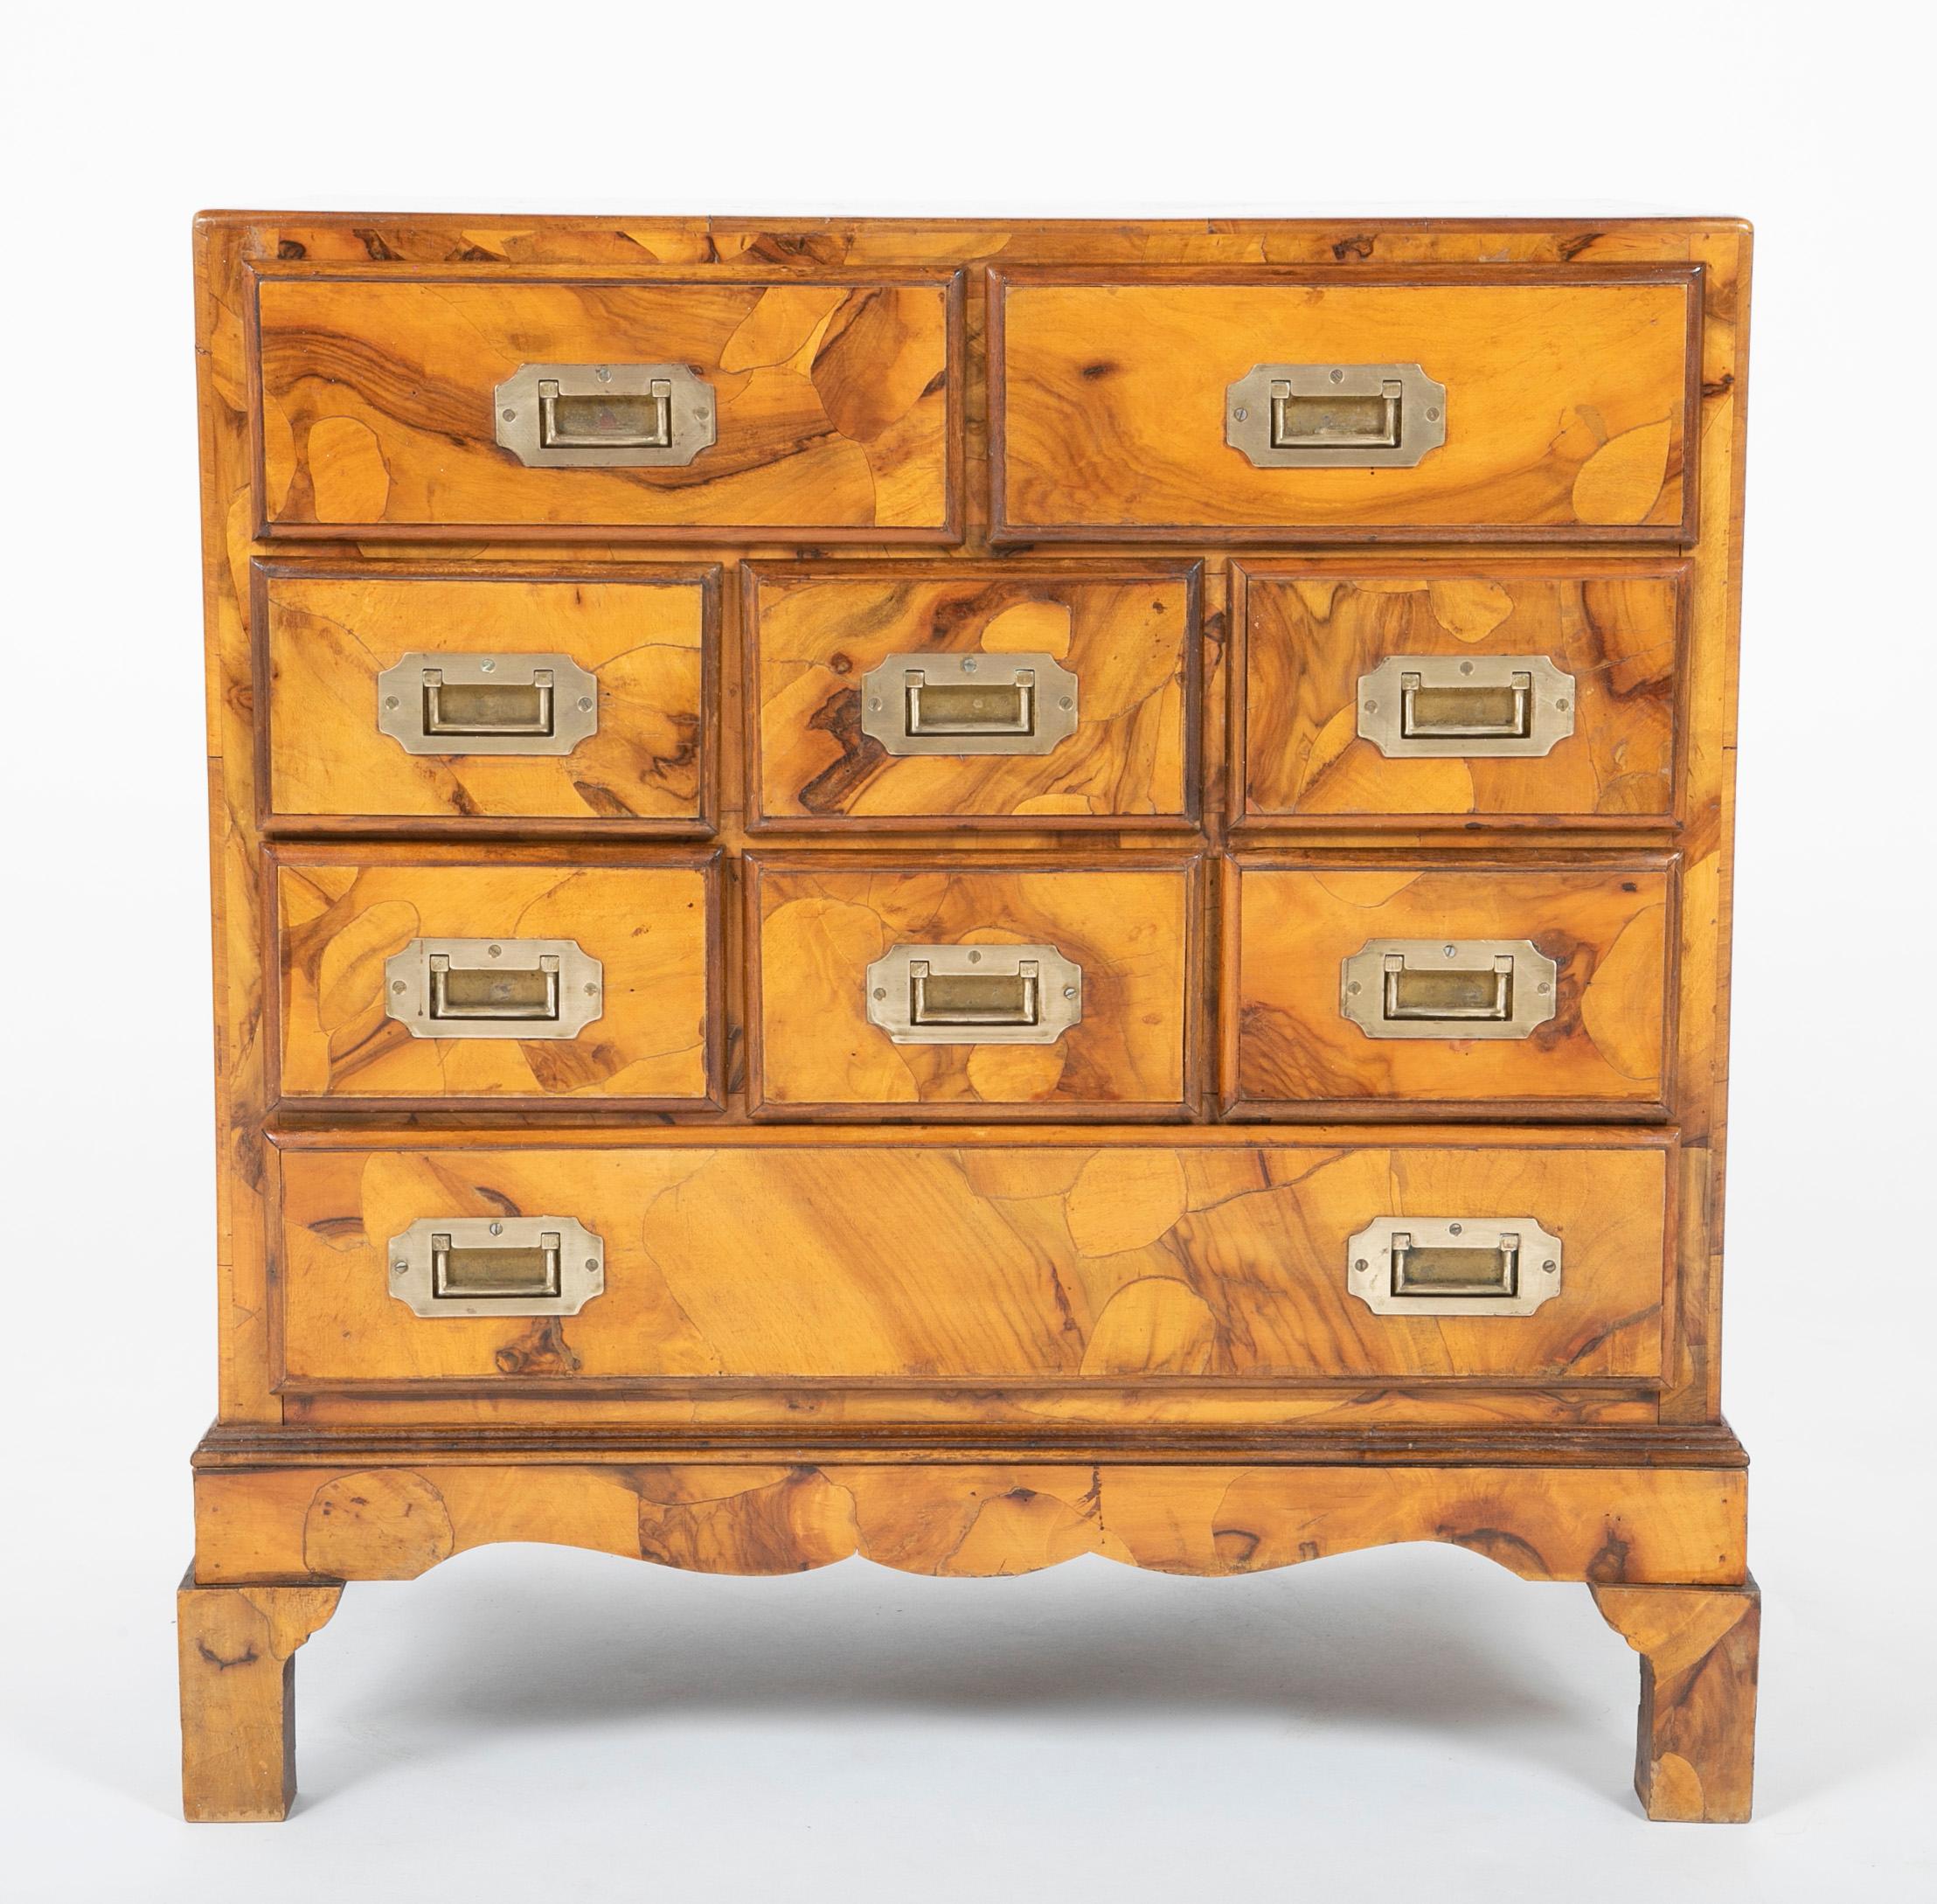 Brass Italian Campaign Chest of Drawers with Olive Wood Veneer, Mid-20th Century For Sale